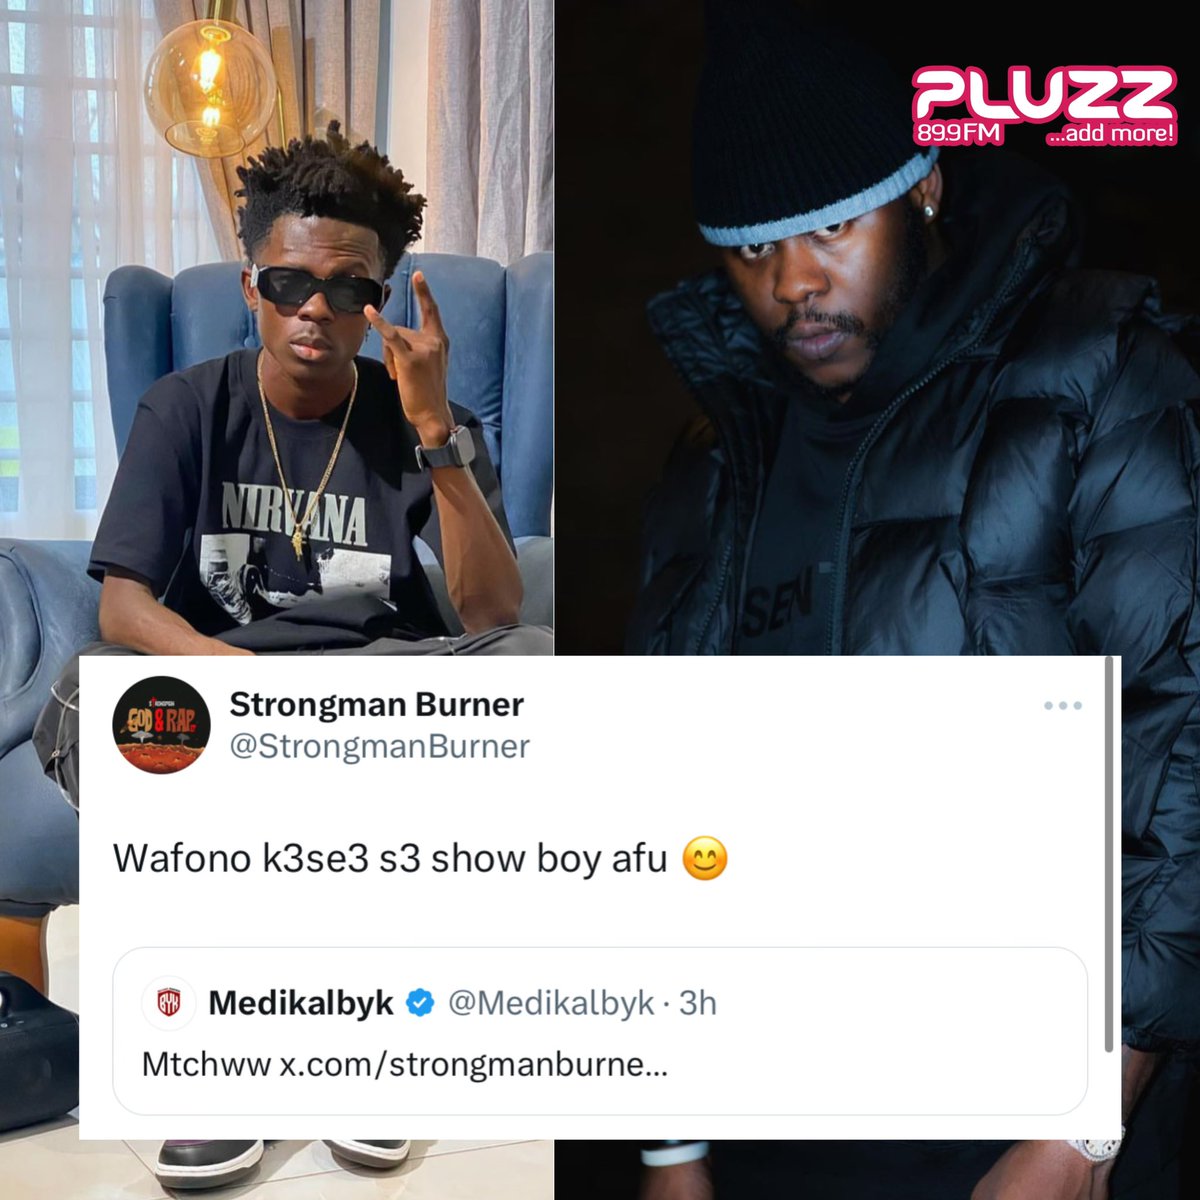 This whole thing doesn’t seem to stop😁 Strongman claps back at Medikal once again #AddMore #AccrasMusicLeader